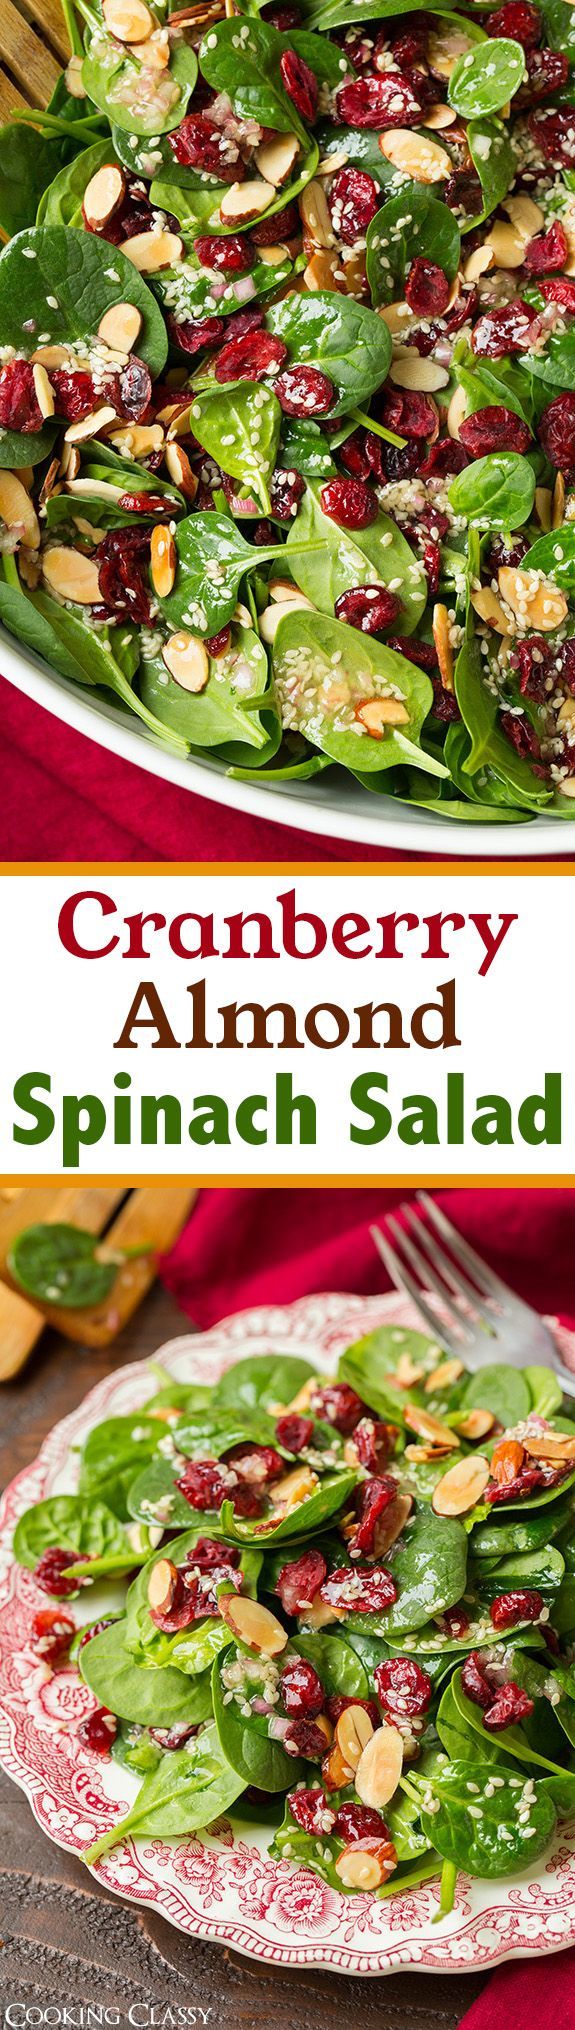 Cranberry Almond Spinach Salad with Sesame Seed Dressing – A delicious, simple and